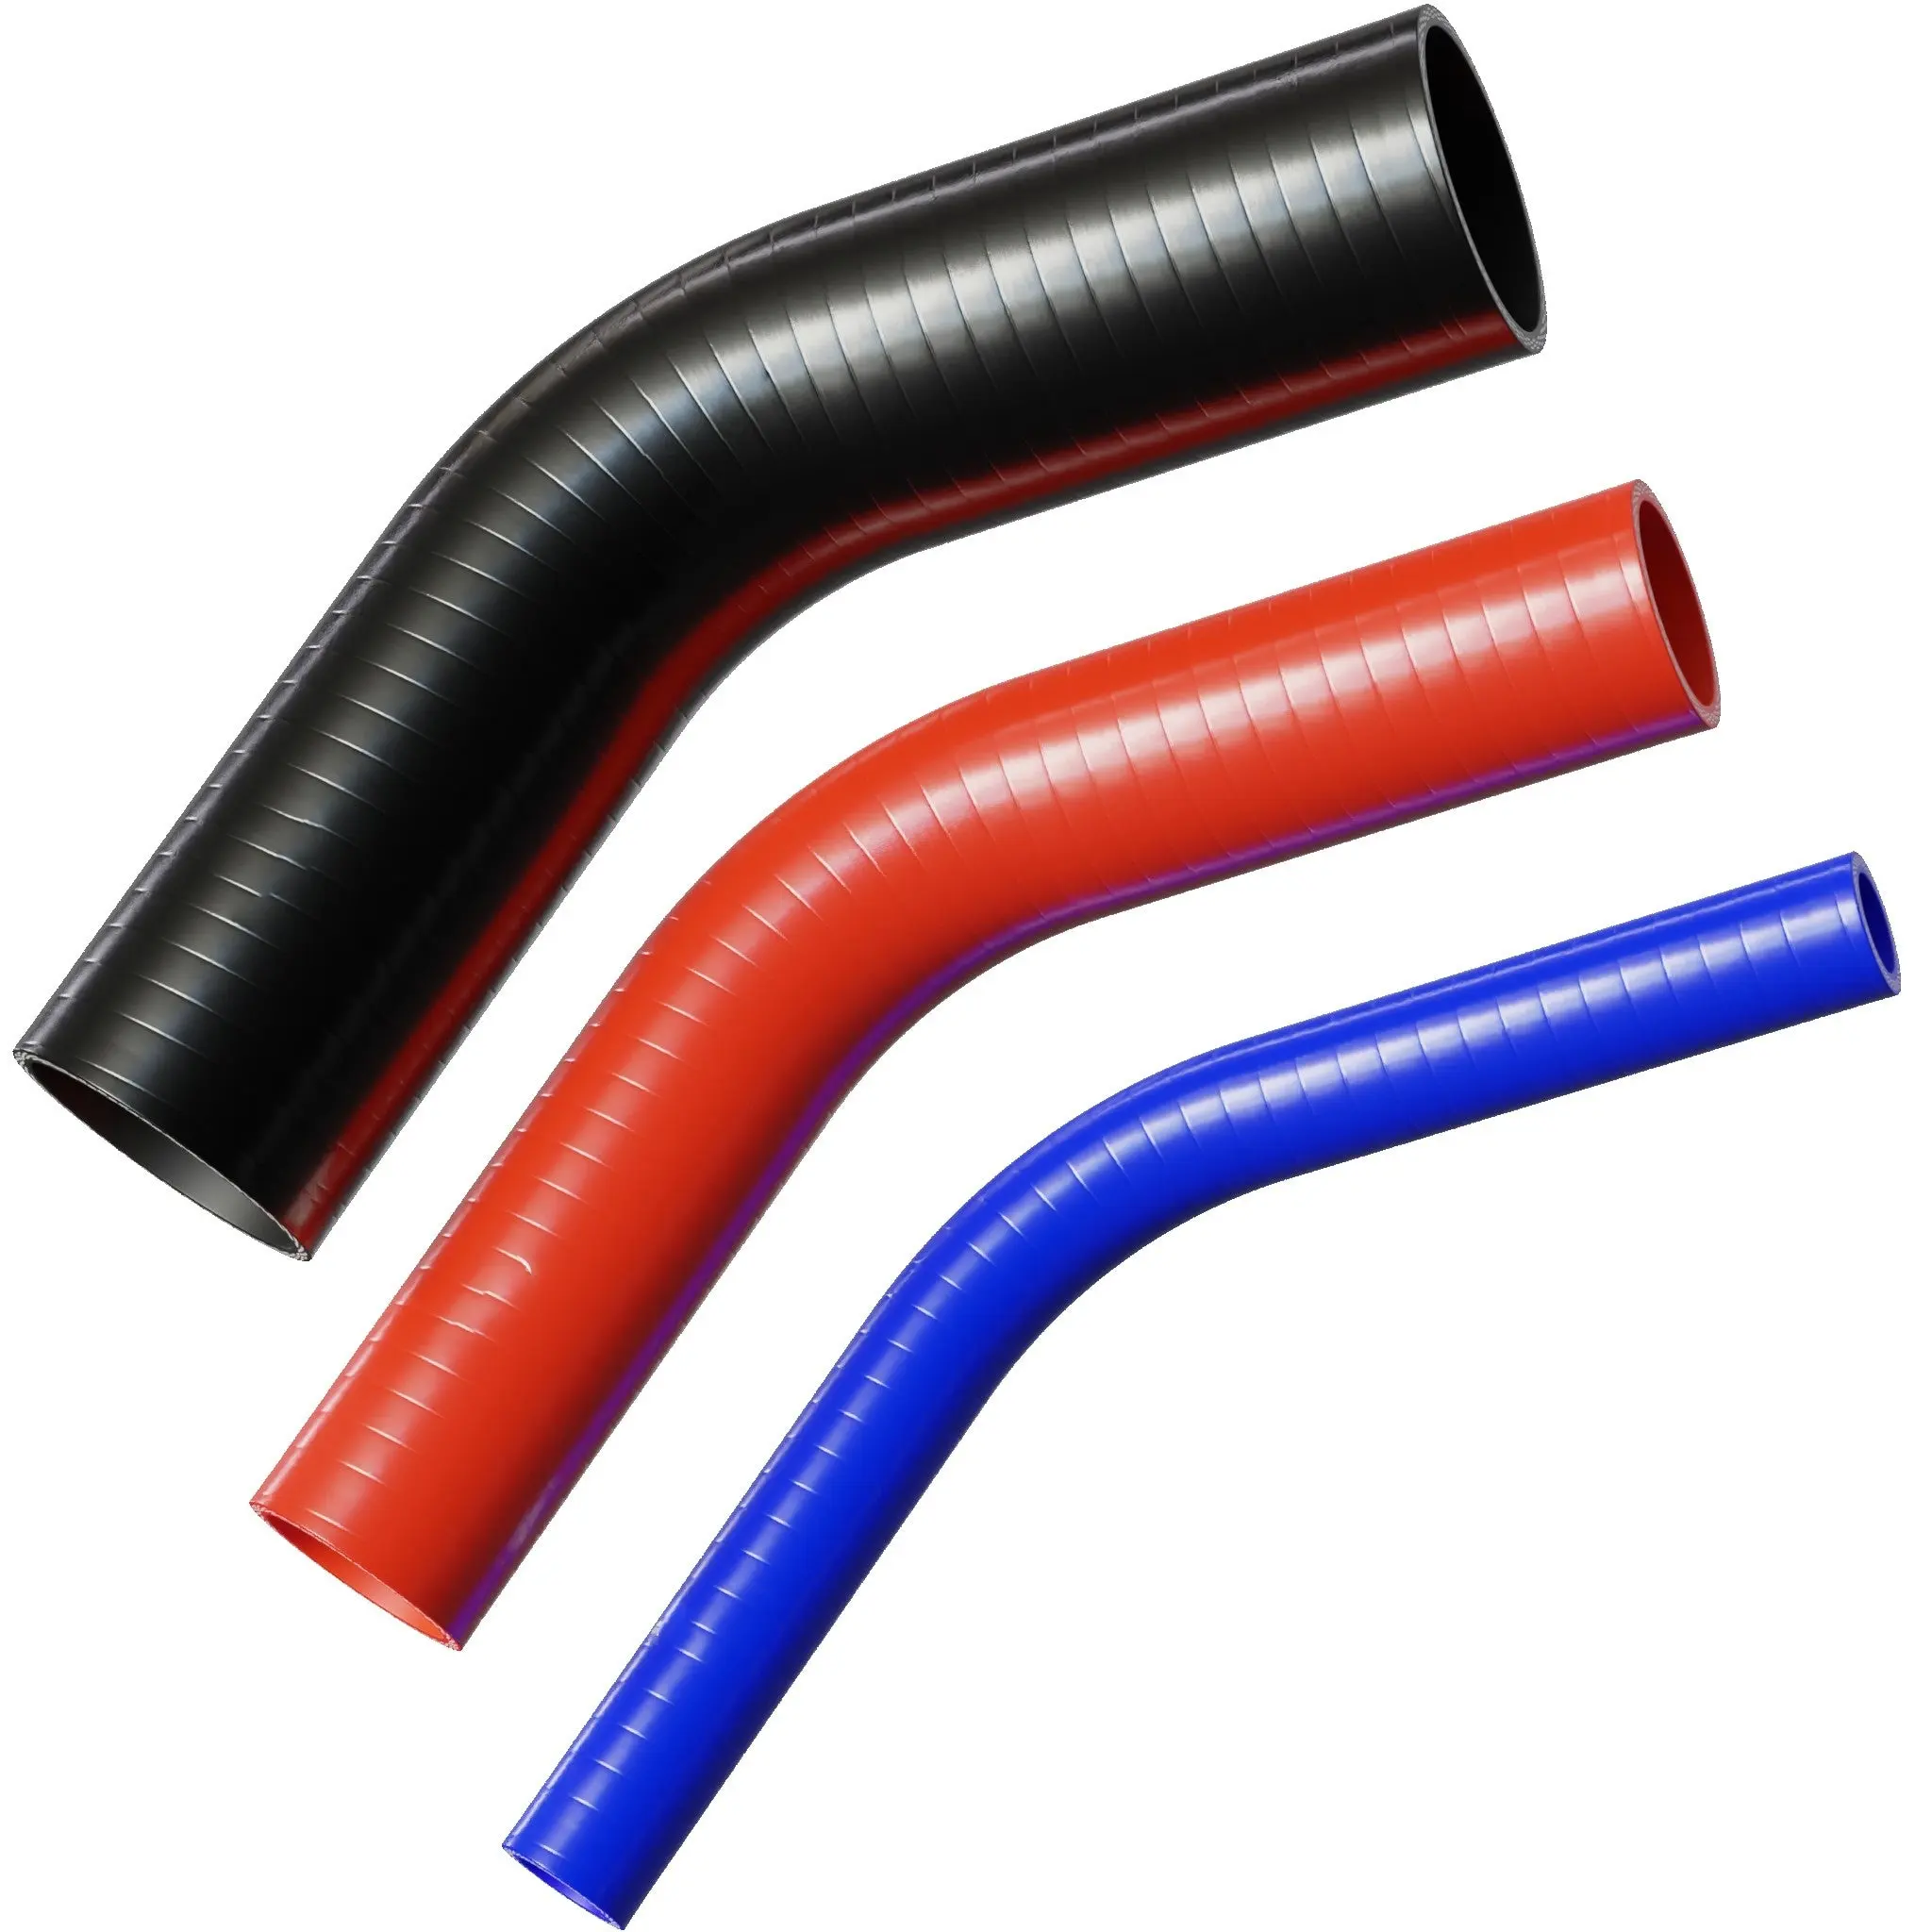 High Quality Braided Automotive Reducer 45-Degree Flexible Elbow Silicone Rubber Hose in Red